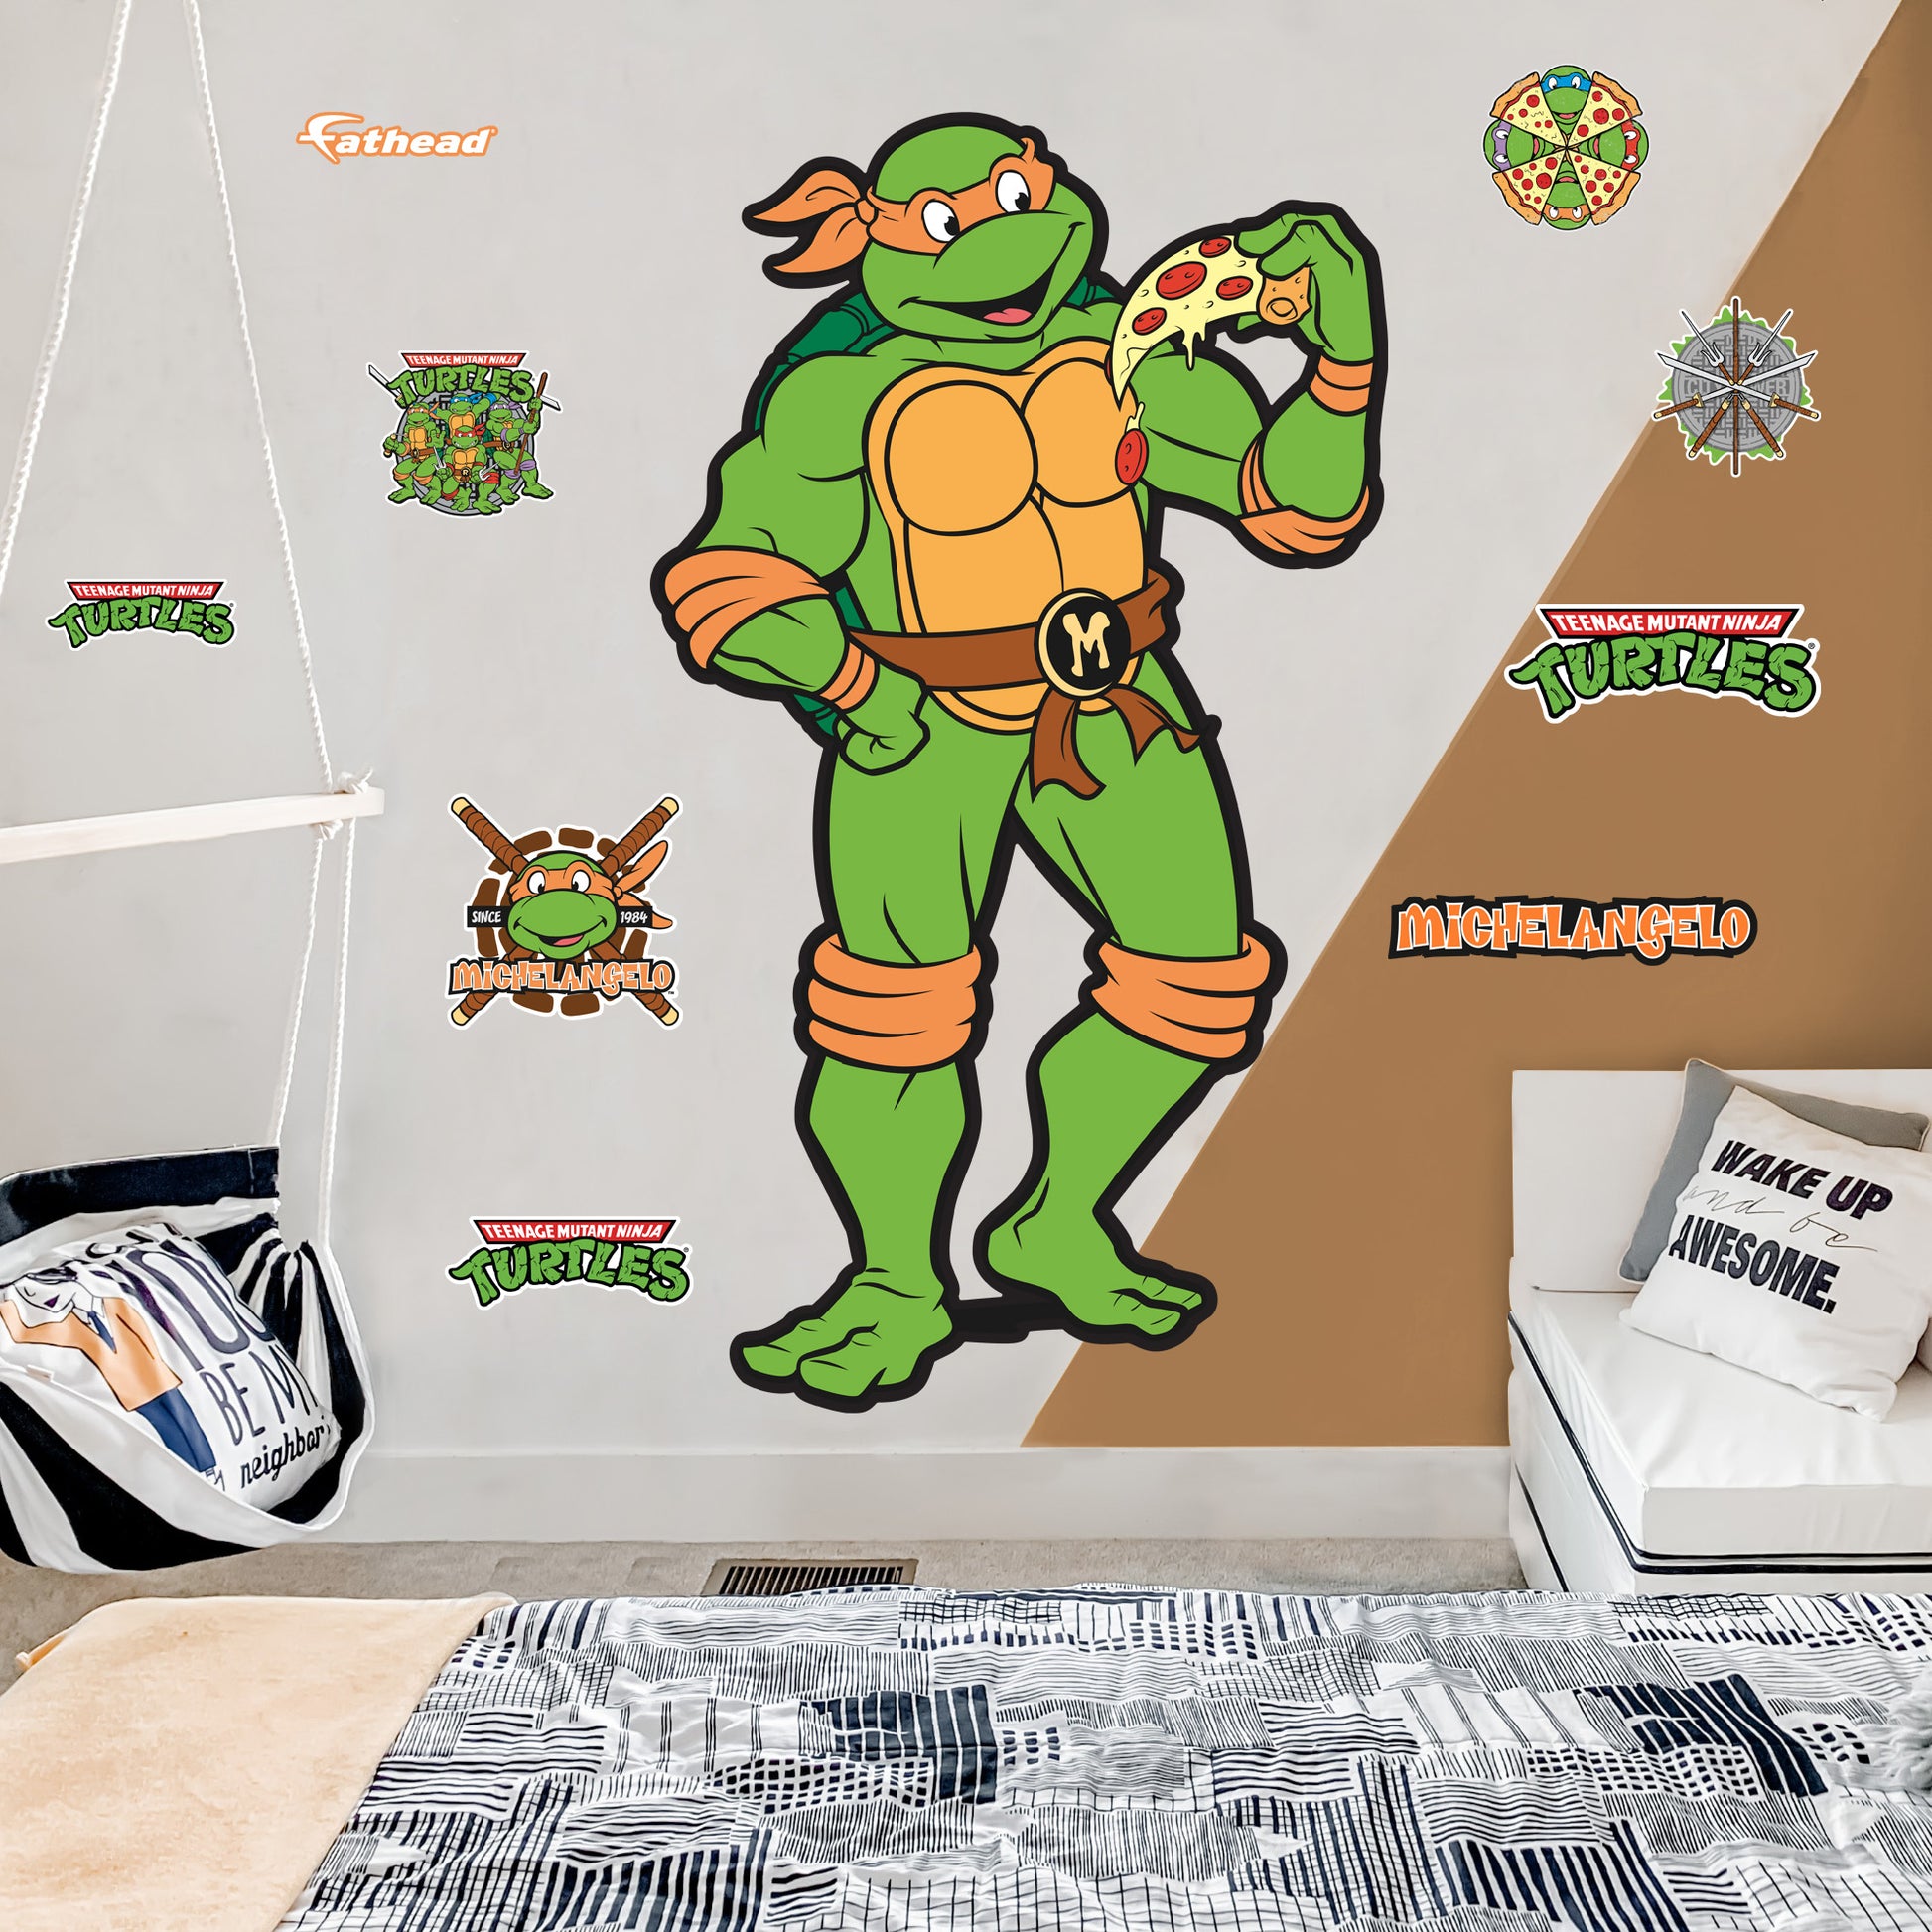 Life-Size Character +9 Decals  (44"W x 78"H) 